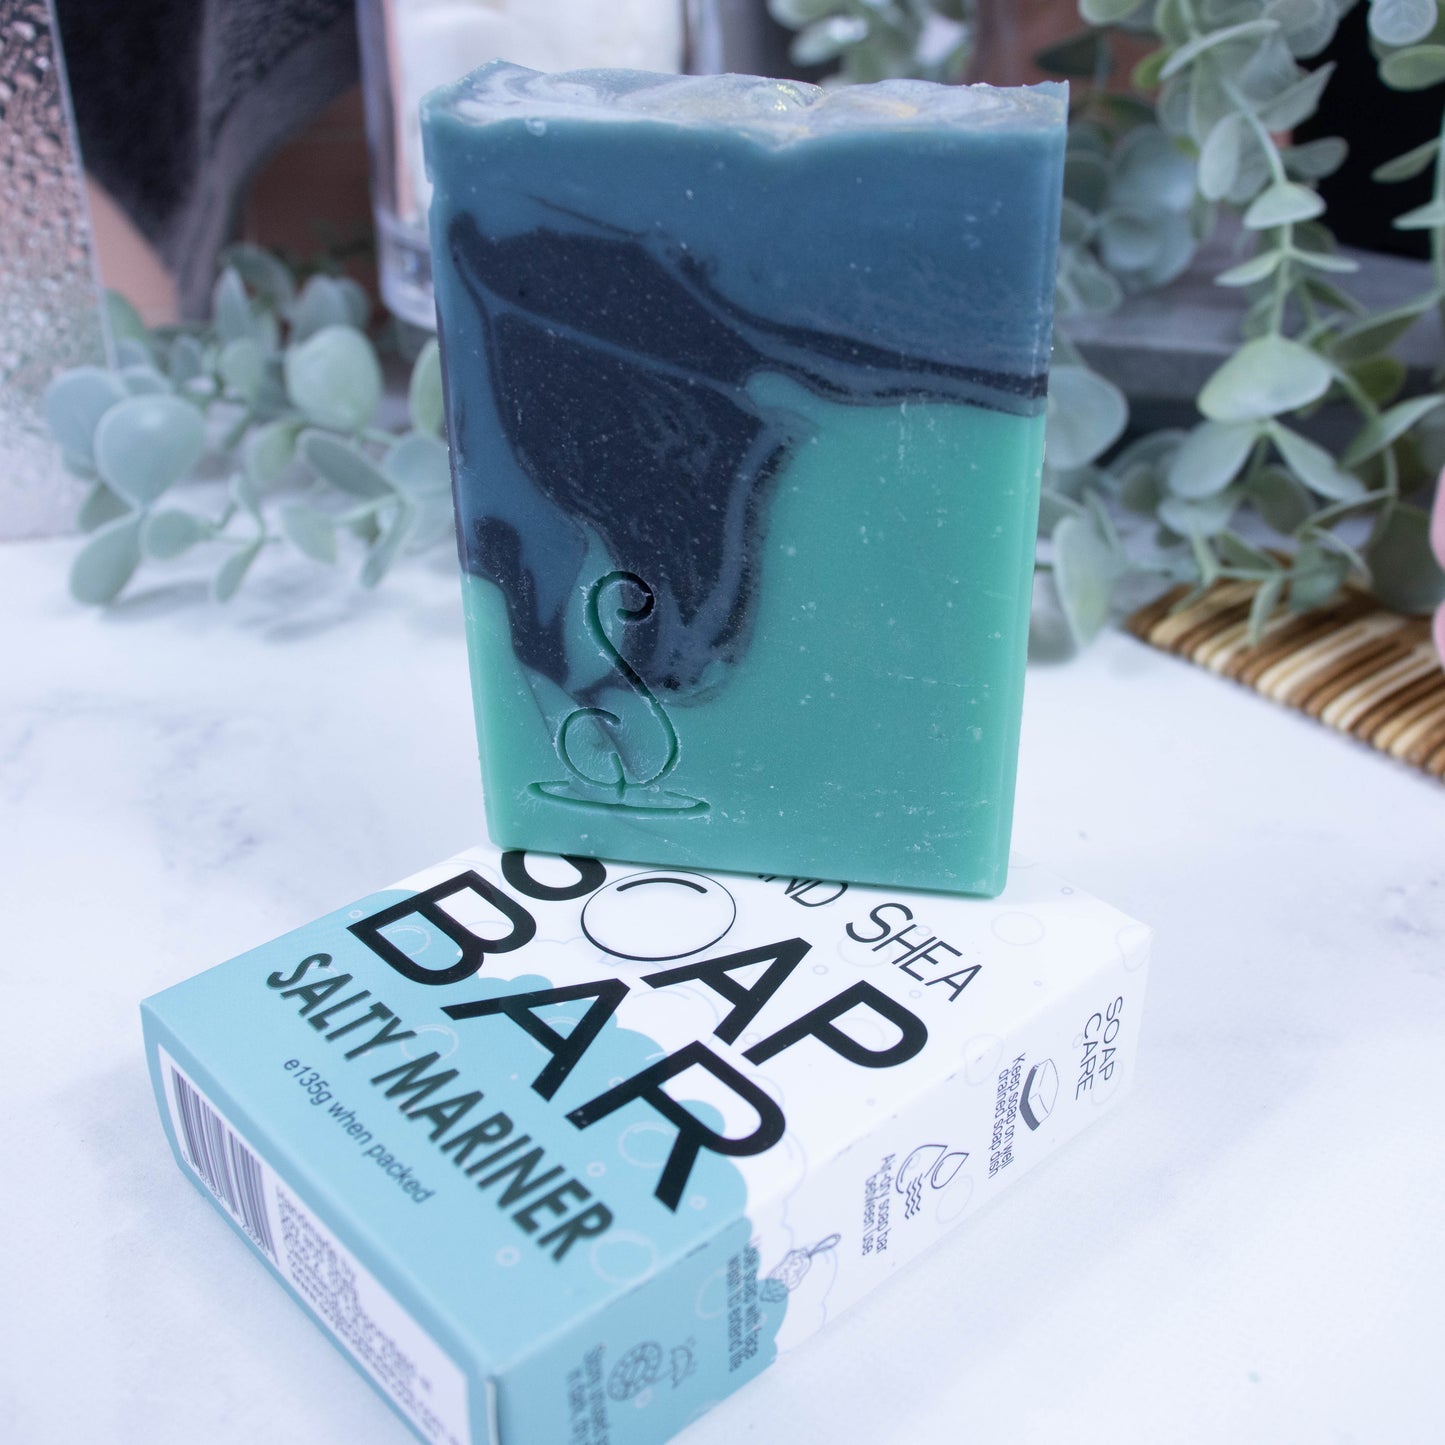 A tall rectangular soap bar is sitting on top of it's box.  The soap has three layers of colour; a sea green base, black centre and teal at the top, which have been swirled together to look like a rolling wave.  The soap box is laying flat and is white and sea green in colour